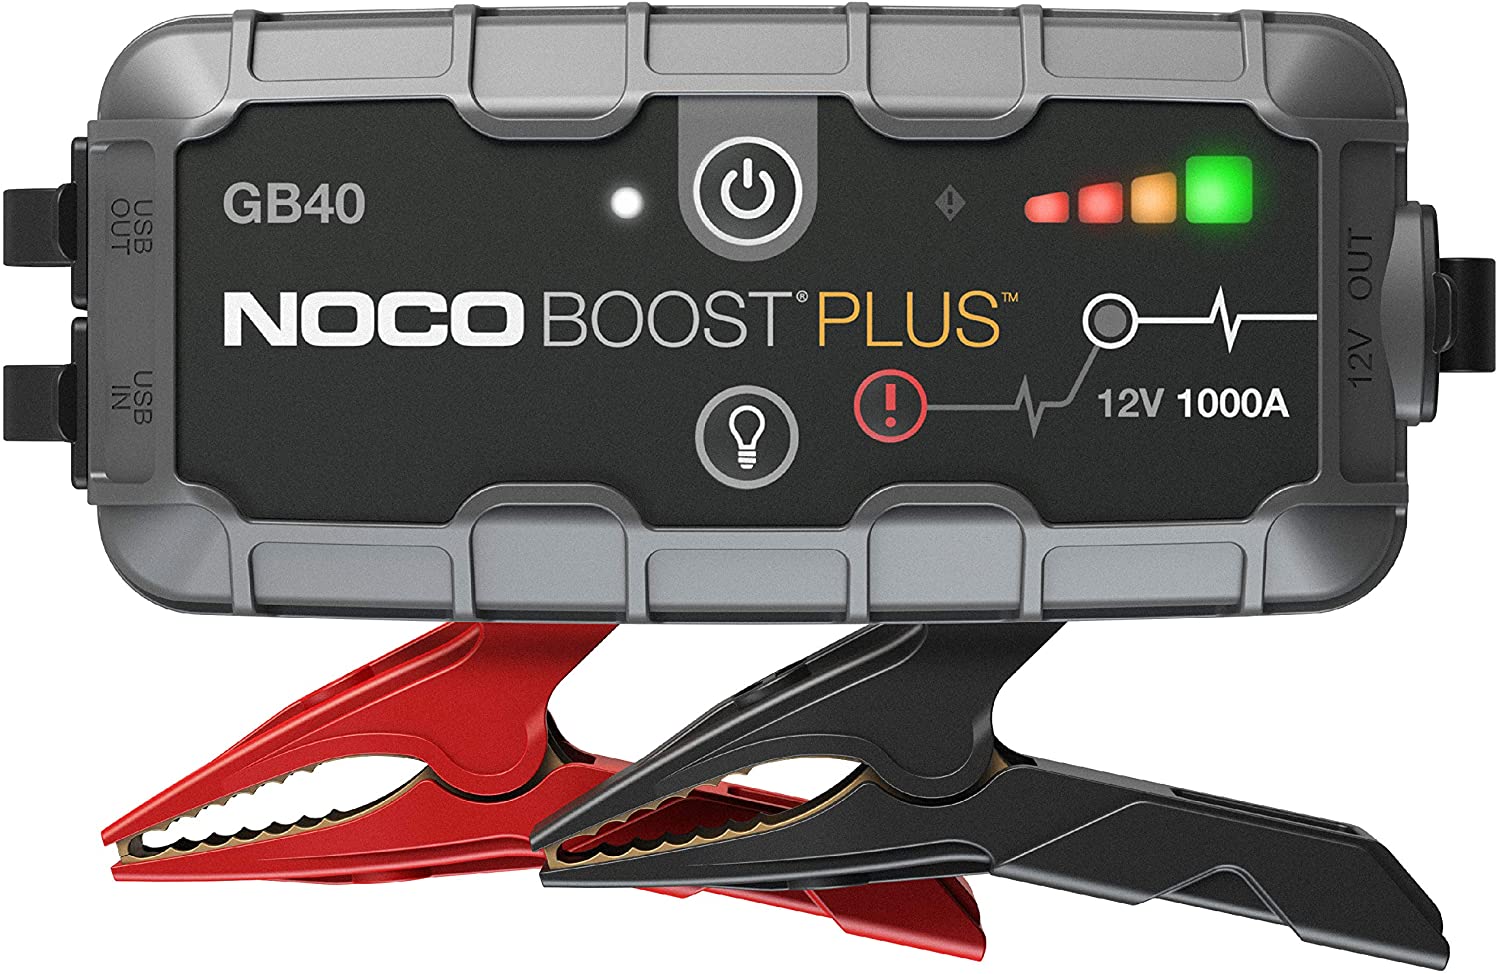 Noco GB40 boost charger